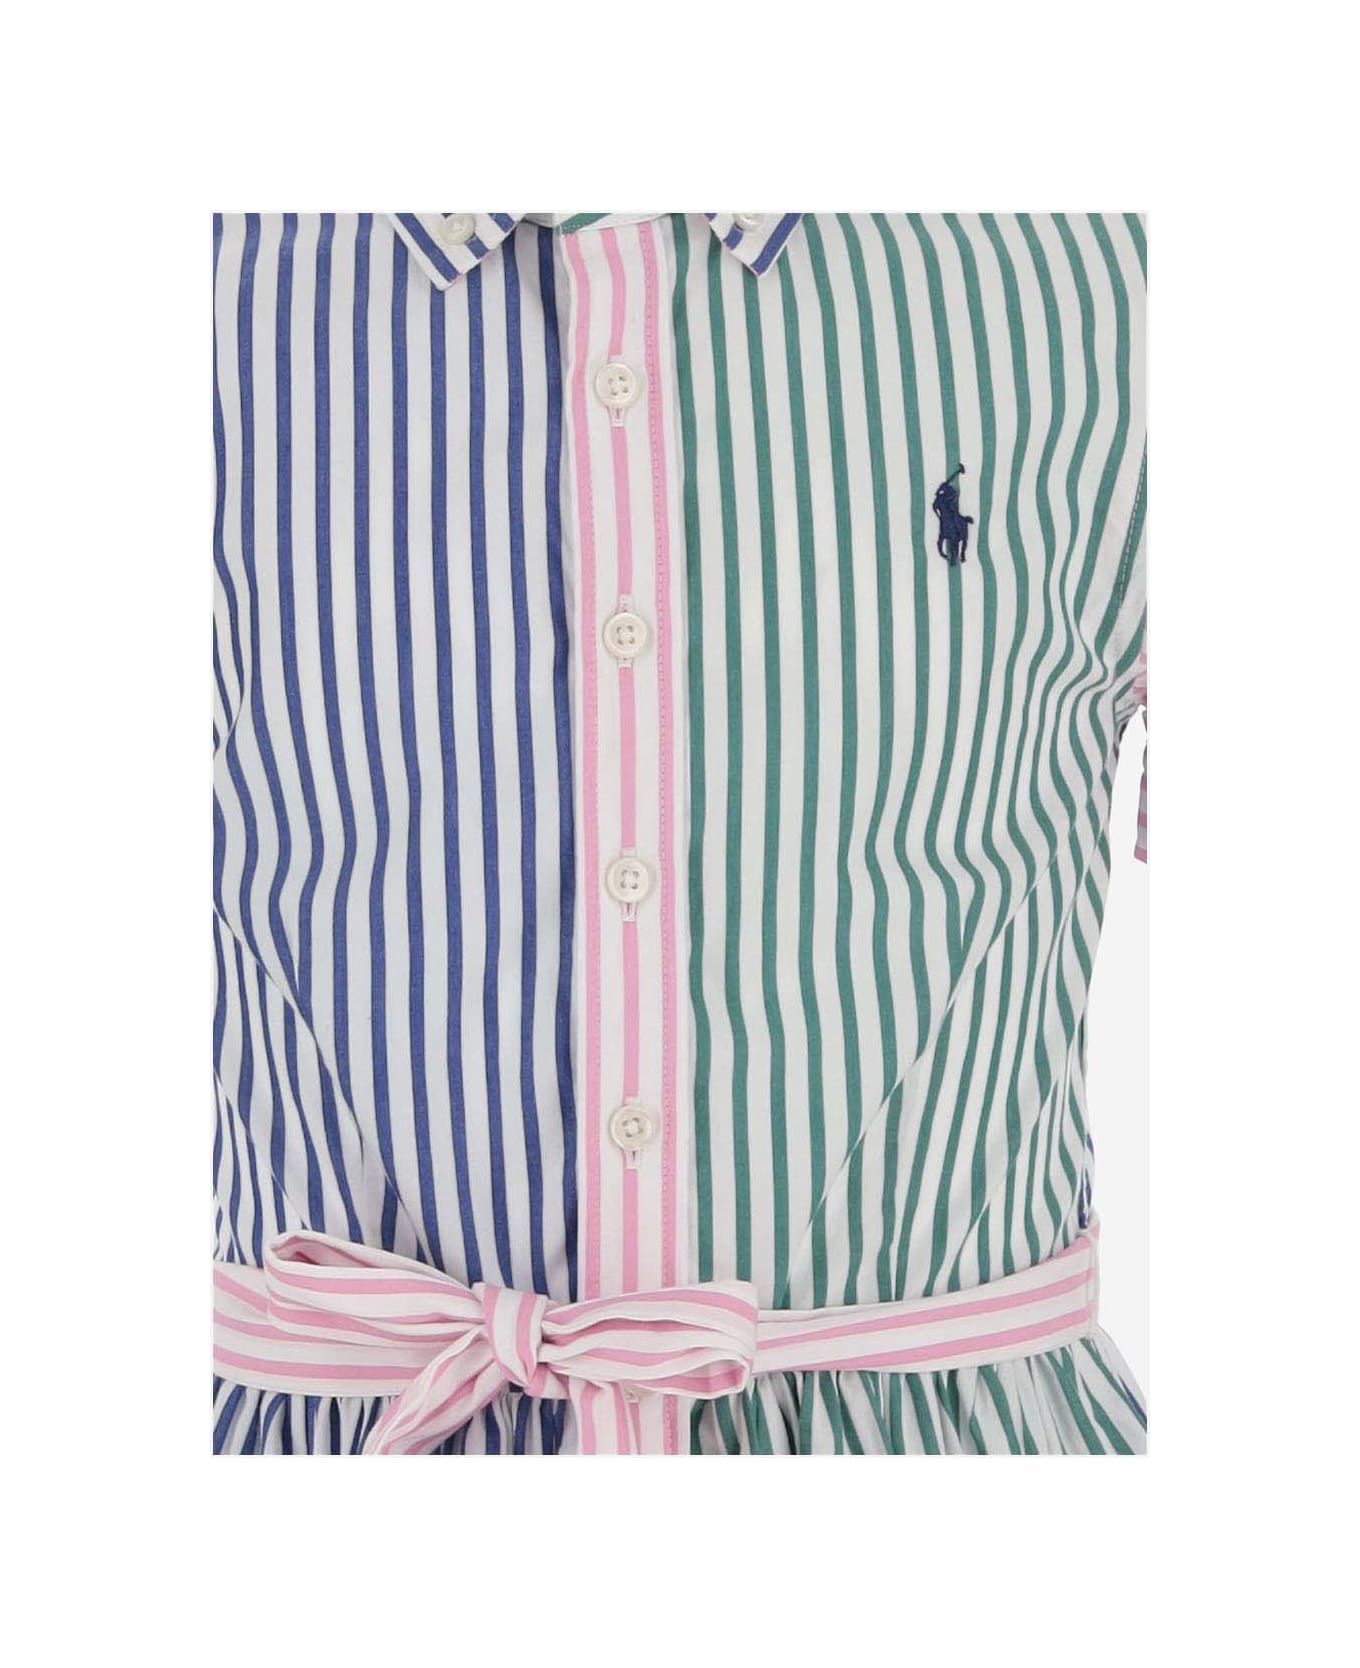 Polo Ralph Lauren Cotton Dress With Striped Pattern - Red